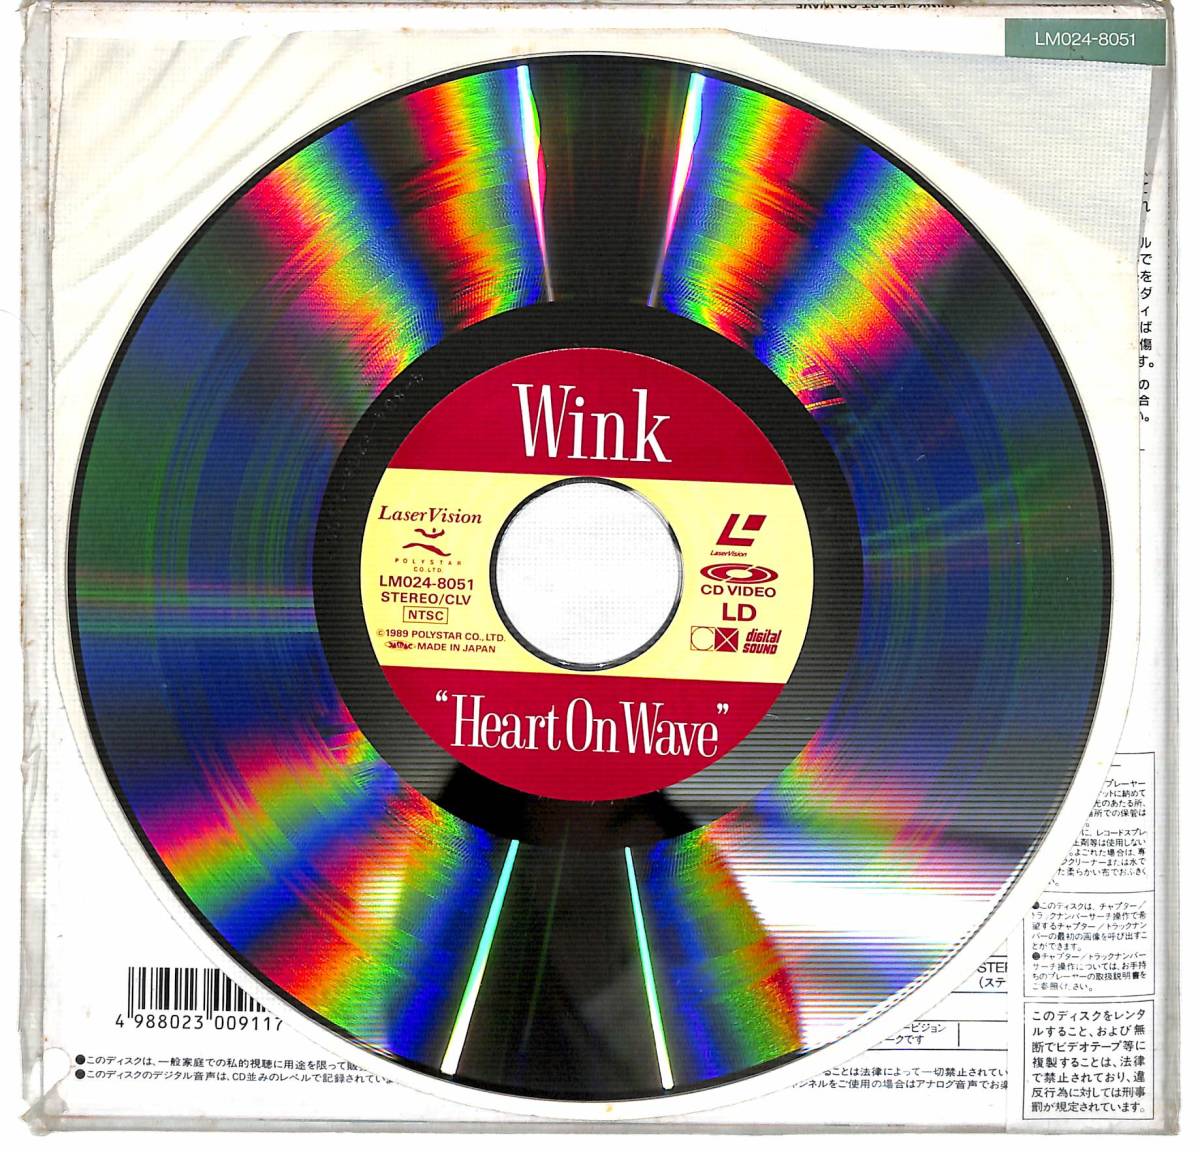 x5723/LD 20cm/帯付/ウィンク/Heart On Waveの画像3